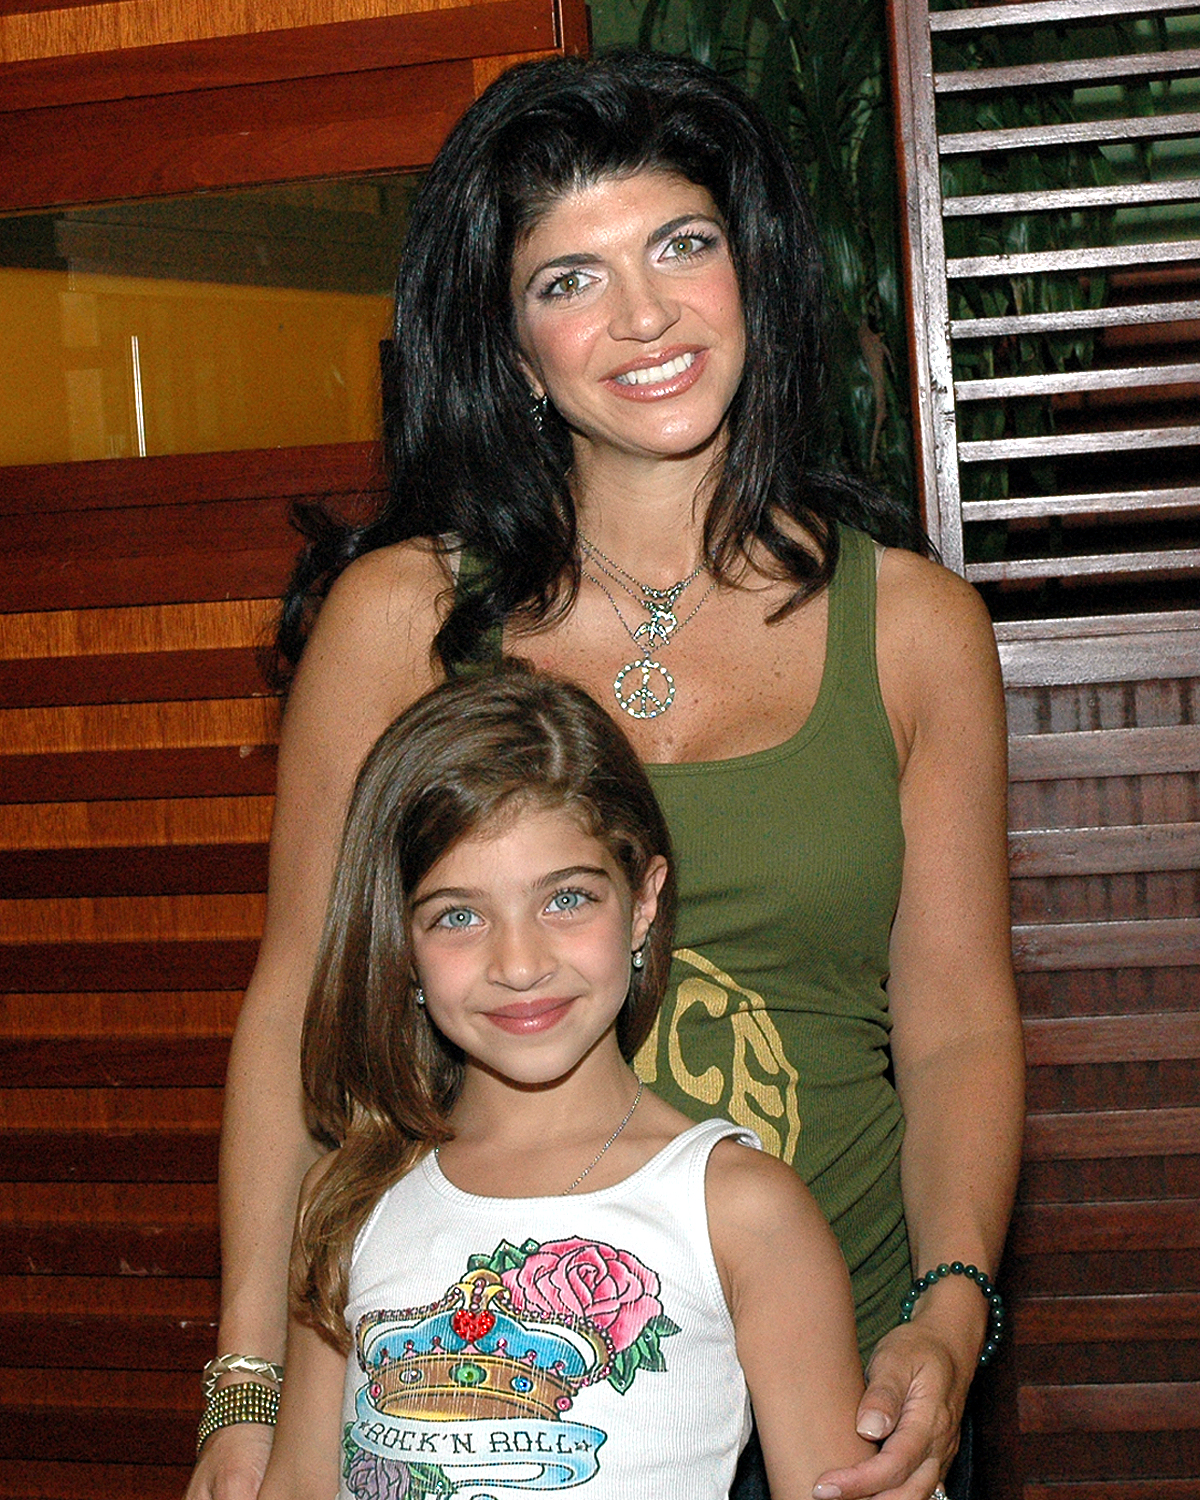 Teresa Giudice (The Real Housewives of New Jersey) with her daughter